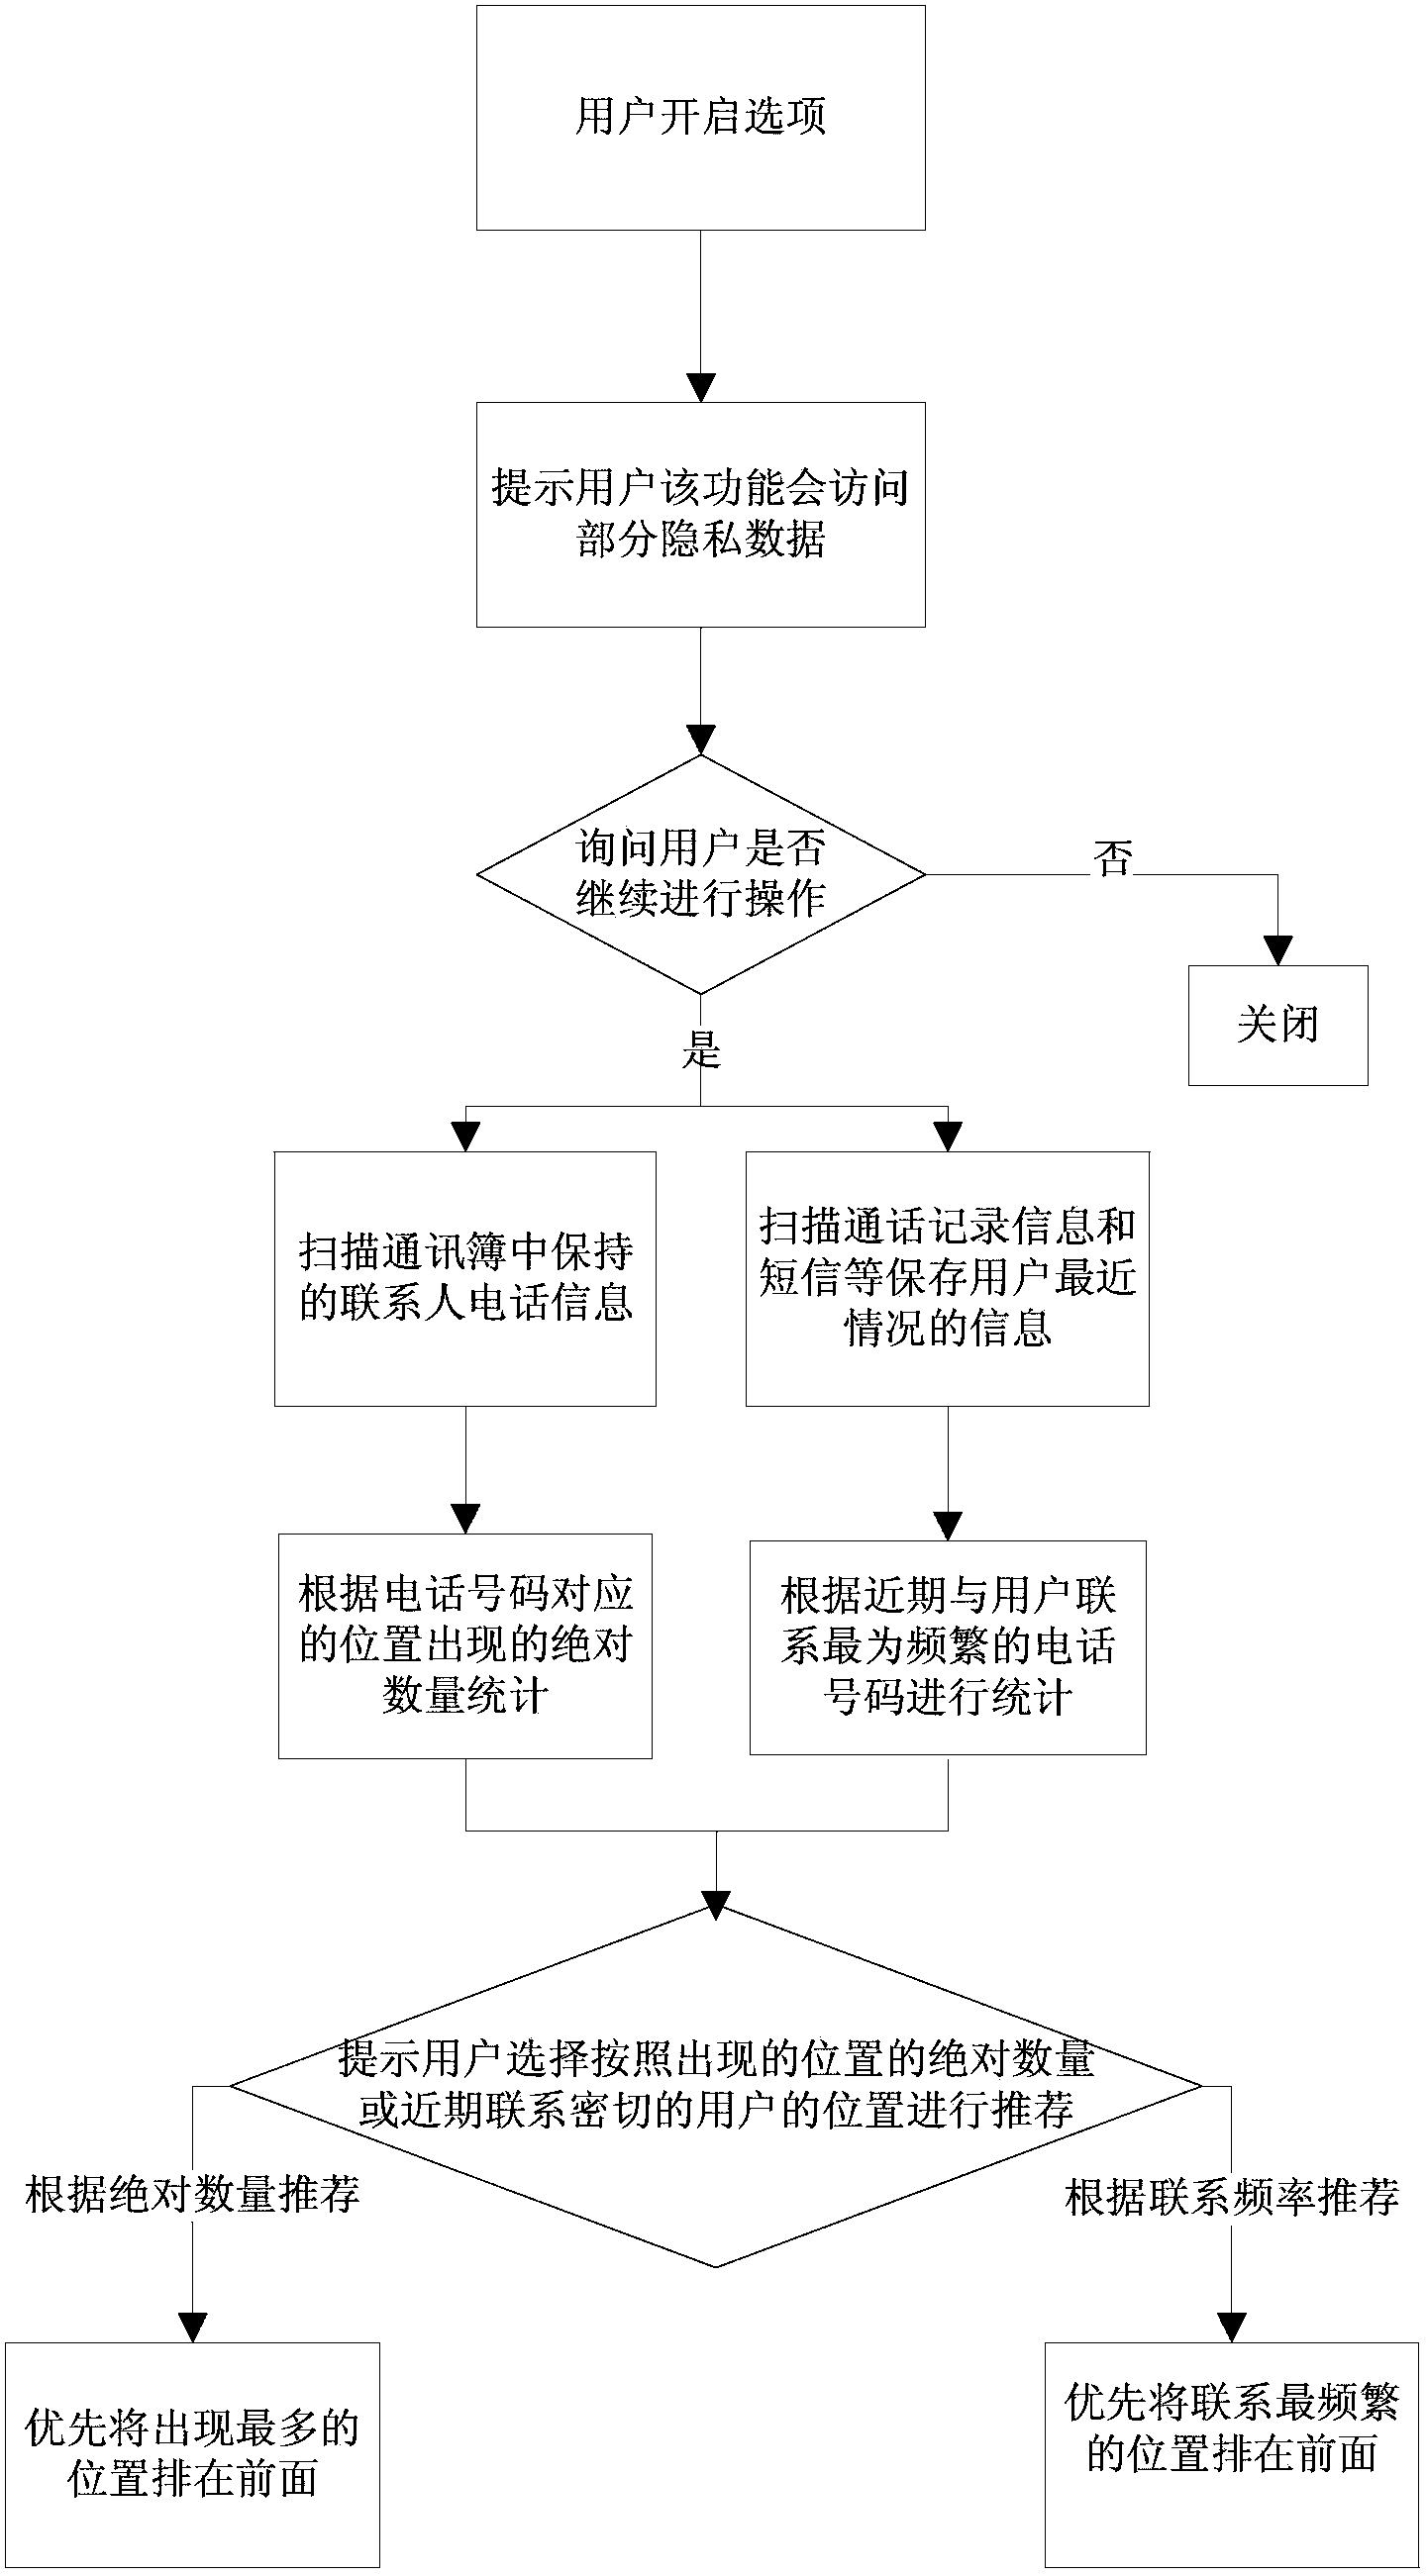 Method and device for pushing information to mobile terminal